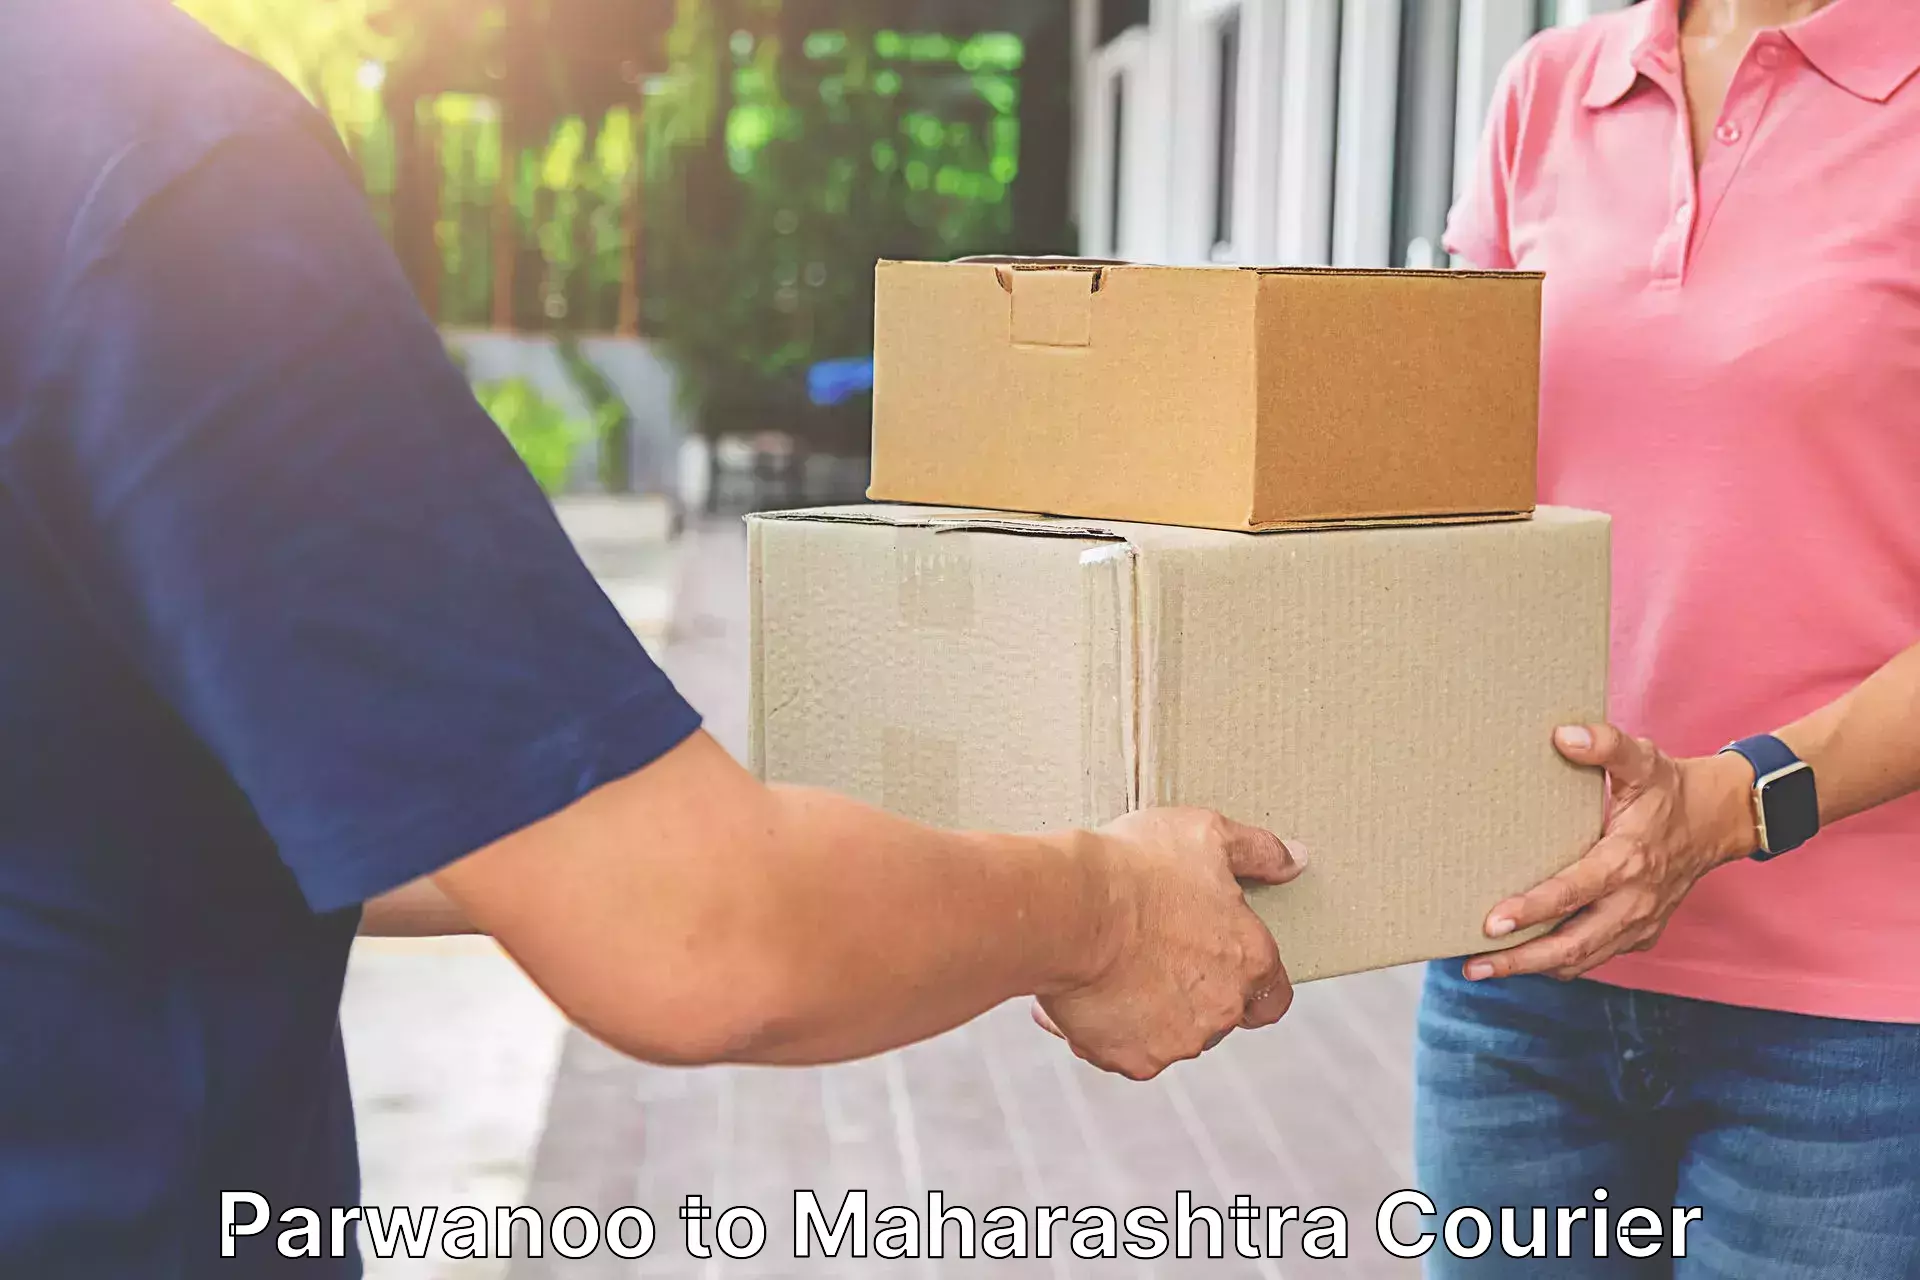 Same-day delivery solutions Parwanoo to Mahim